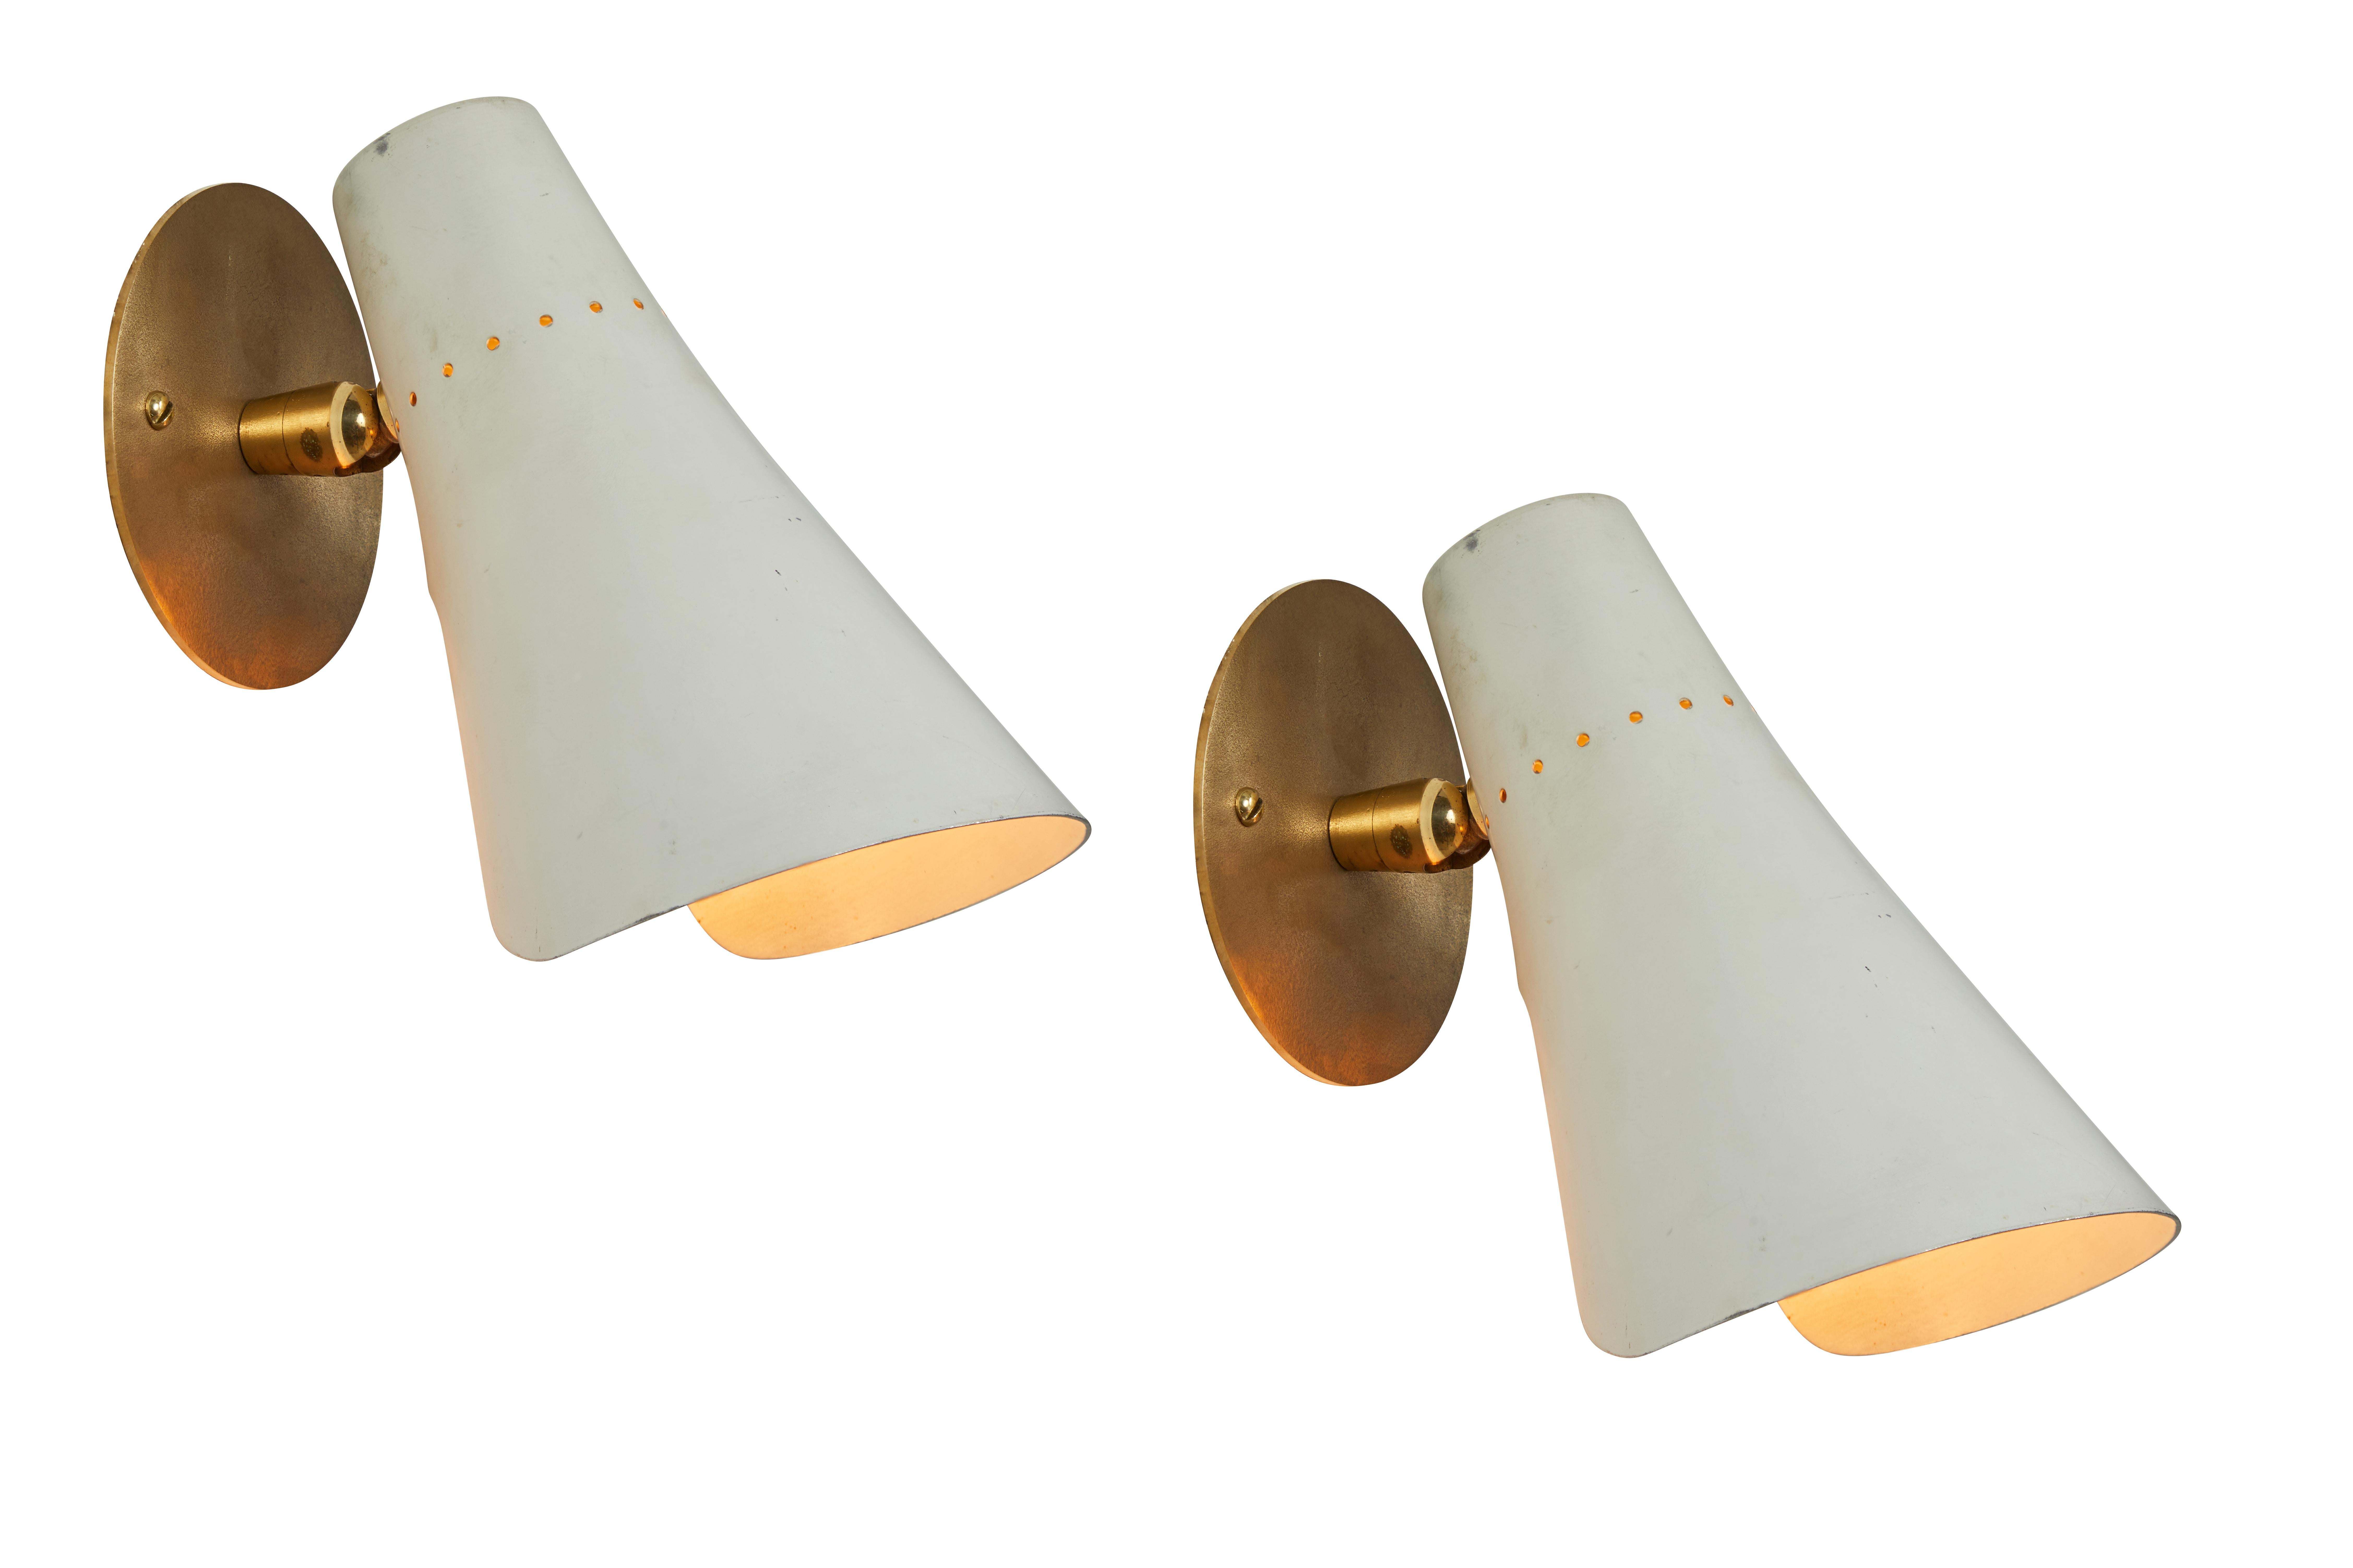 Pair of 1950s Giuseppe Ostuni articulating sconces for O-Luce. Executed in brass and white painted aluminum with perforated shade. Sconces pivot up/down and rotate left/right. Reminiscent of the midcentury Italian designs of Gino Sarfatti for